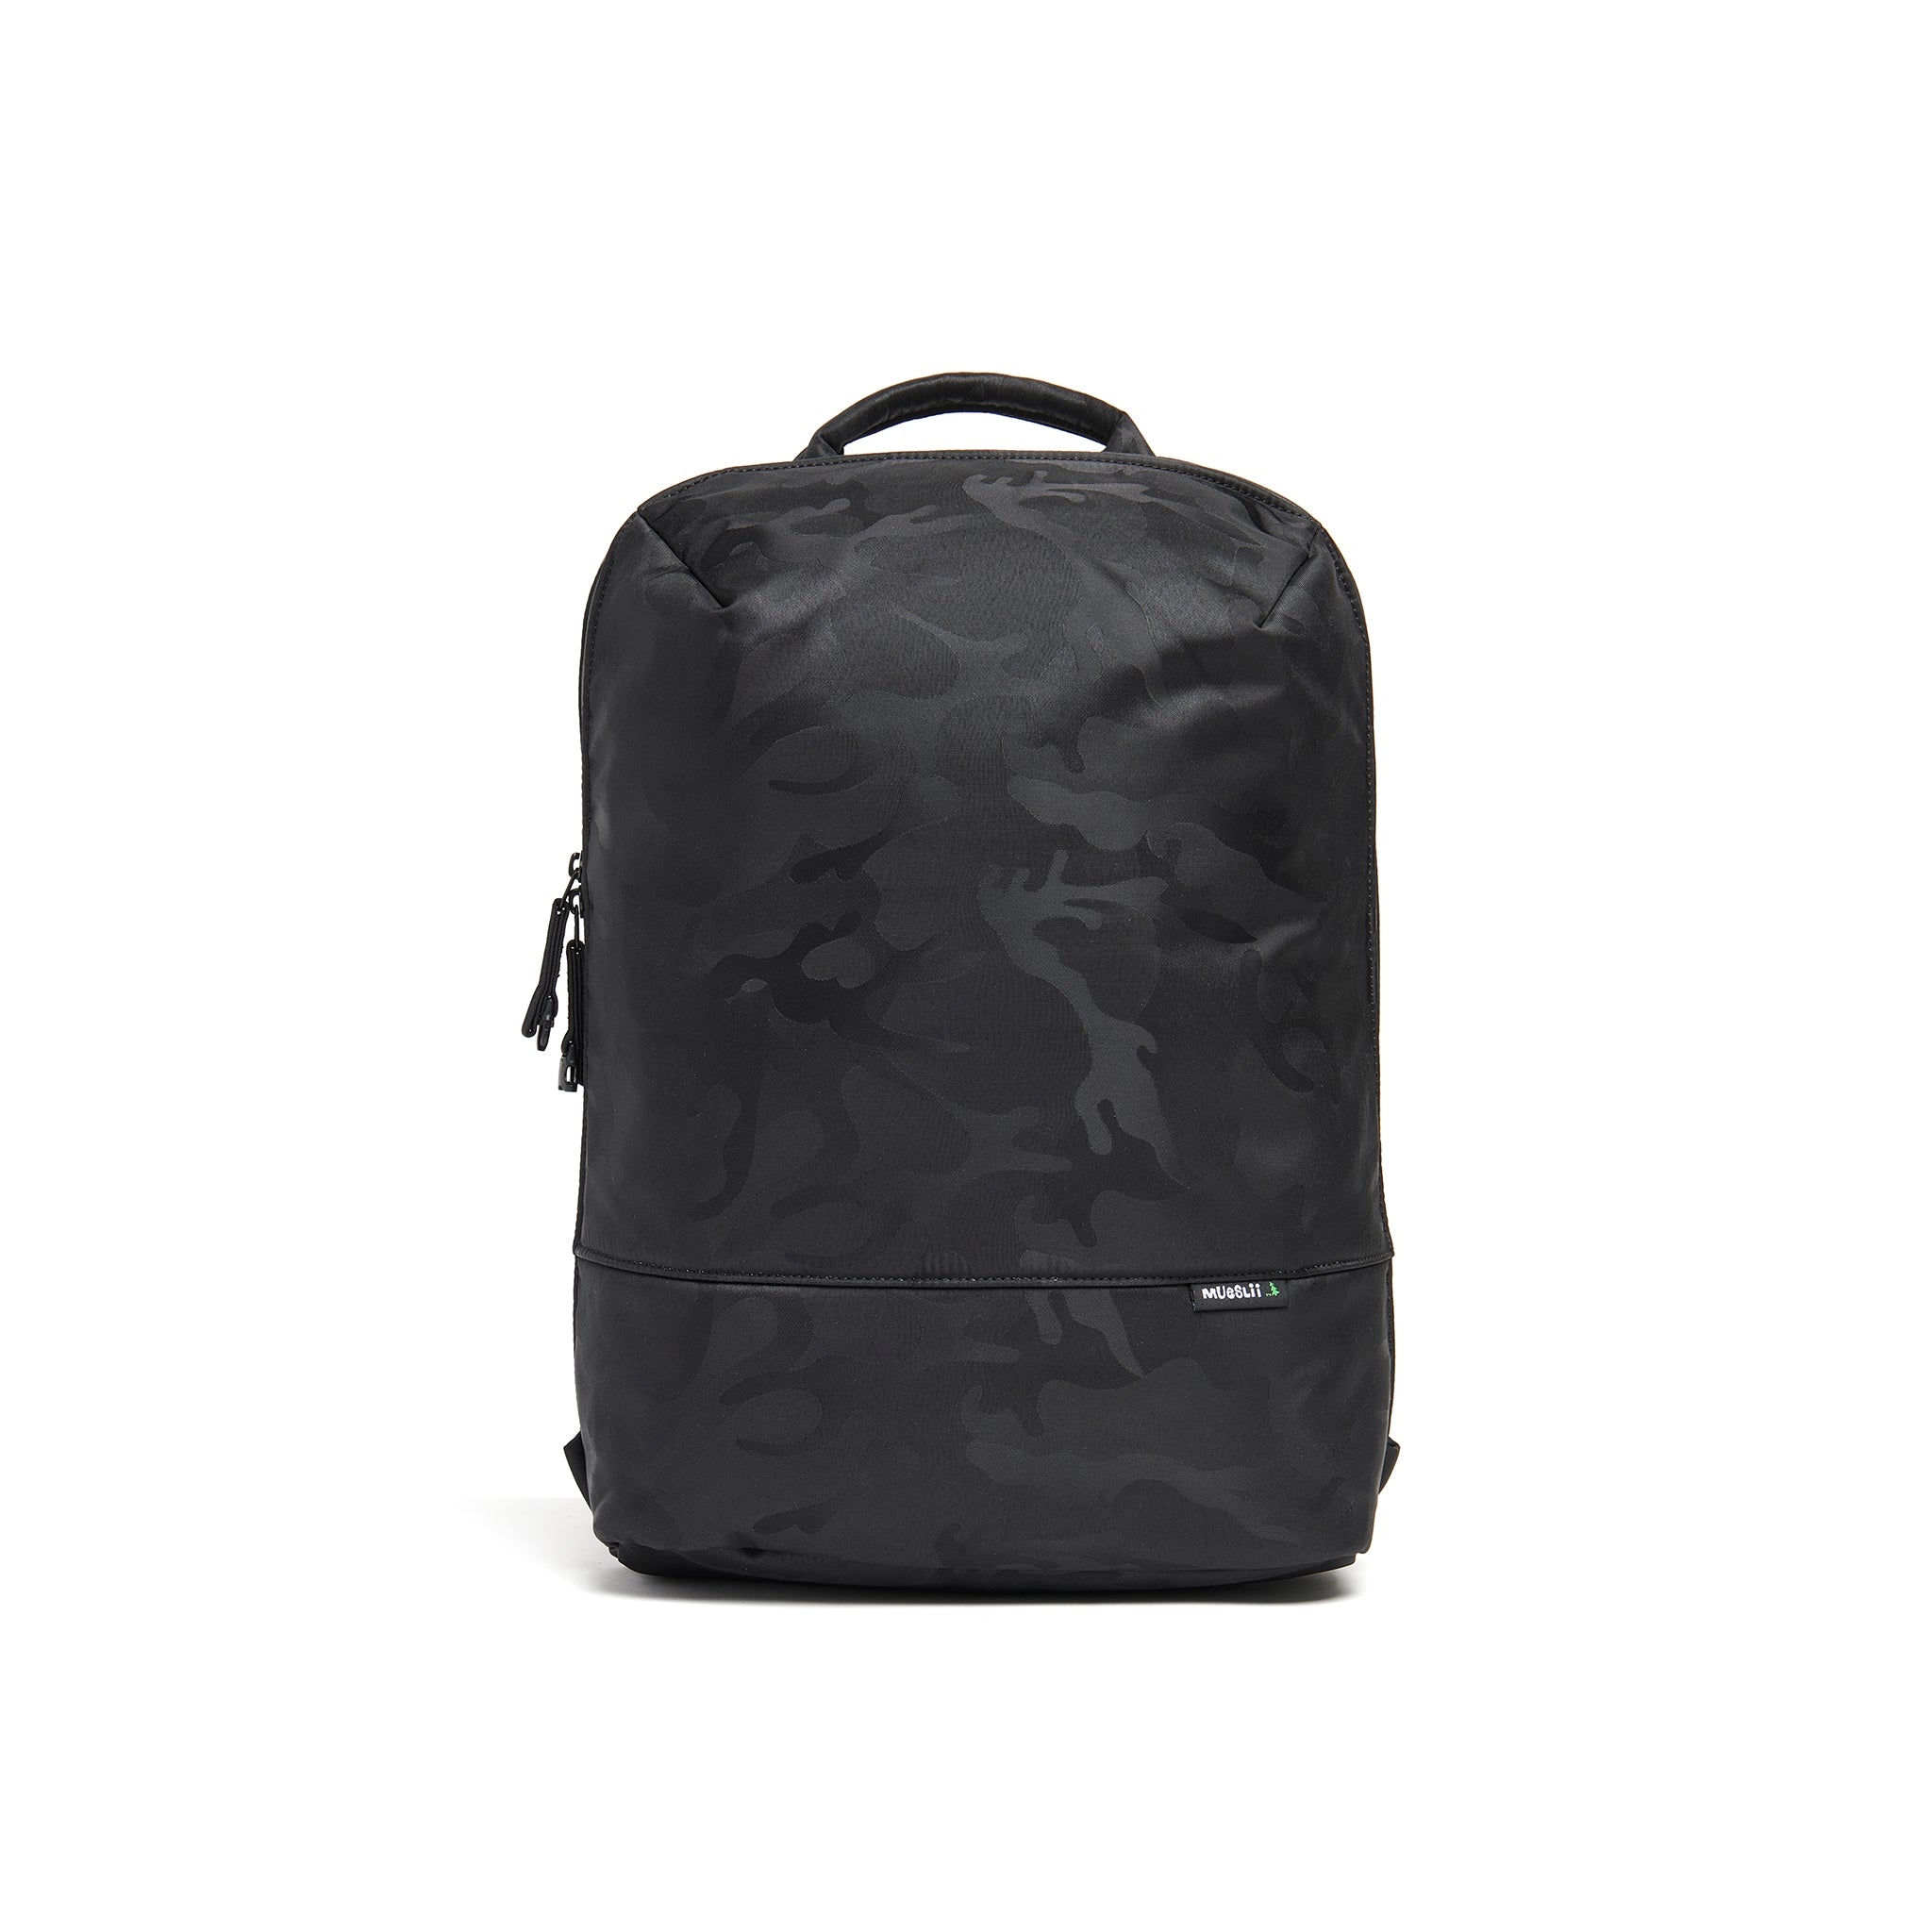 Mueslii daily backpack, made of jacquard  waterproof nylon, camouflage pattern, with a laptop compartment, color black, front view,